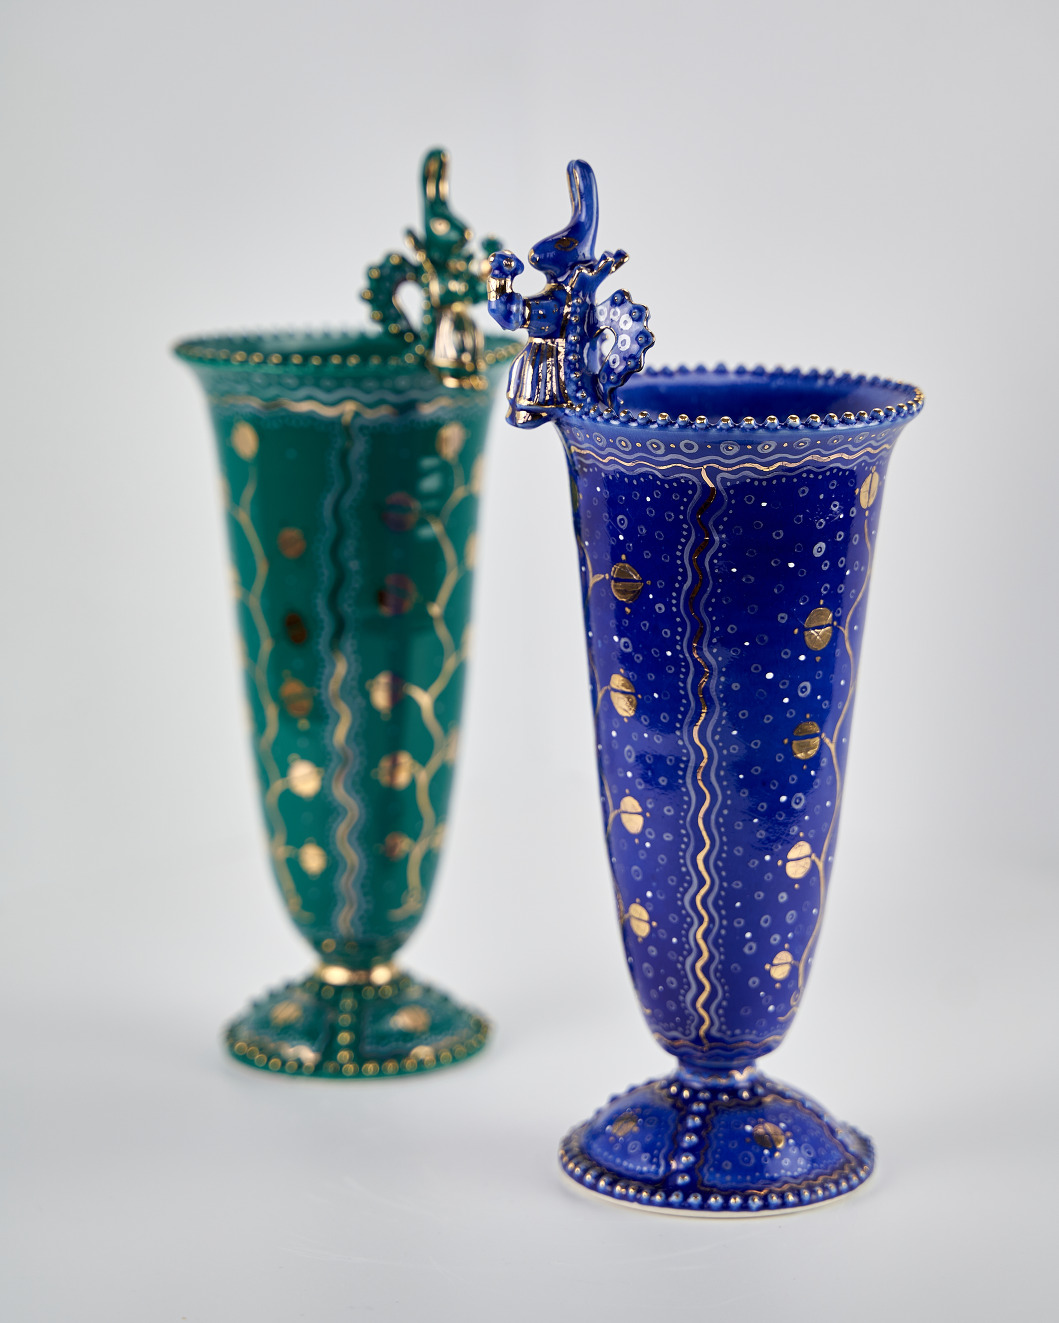 Vases created by the masters of the Mystic Forest (blue/green)